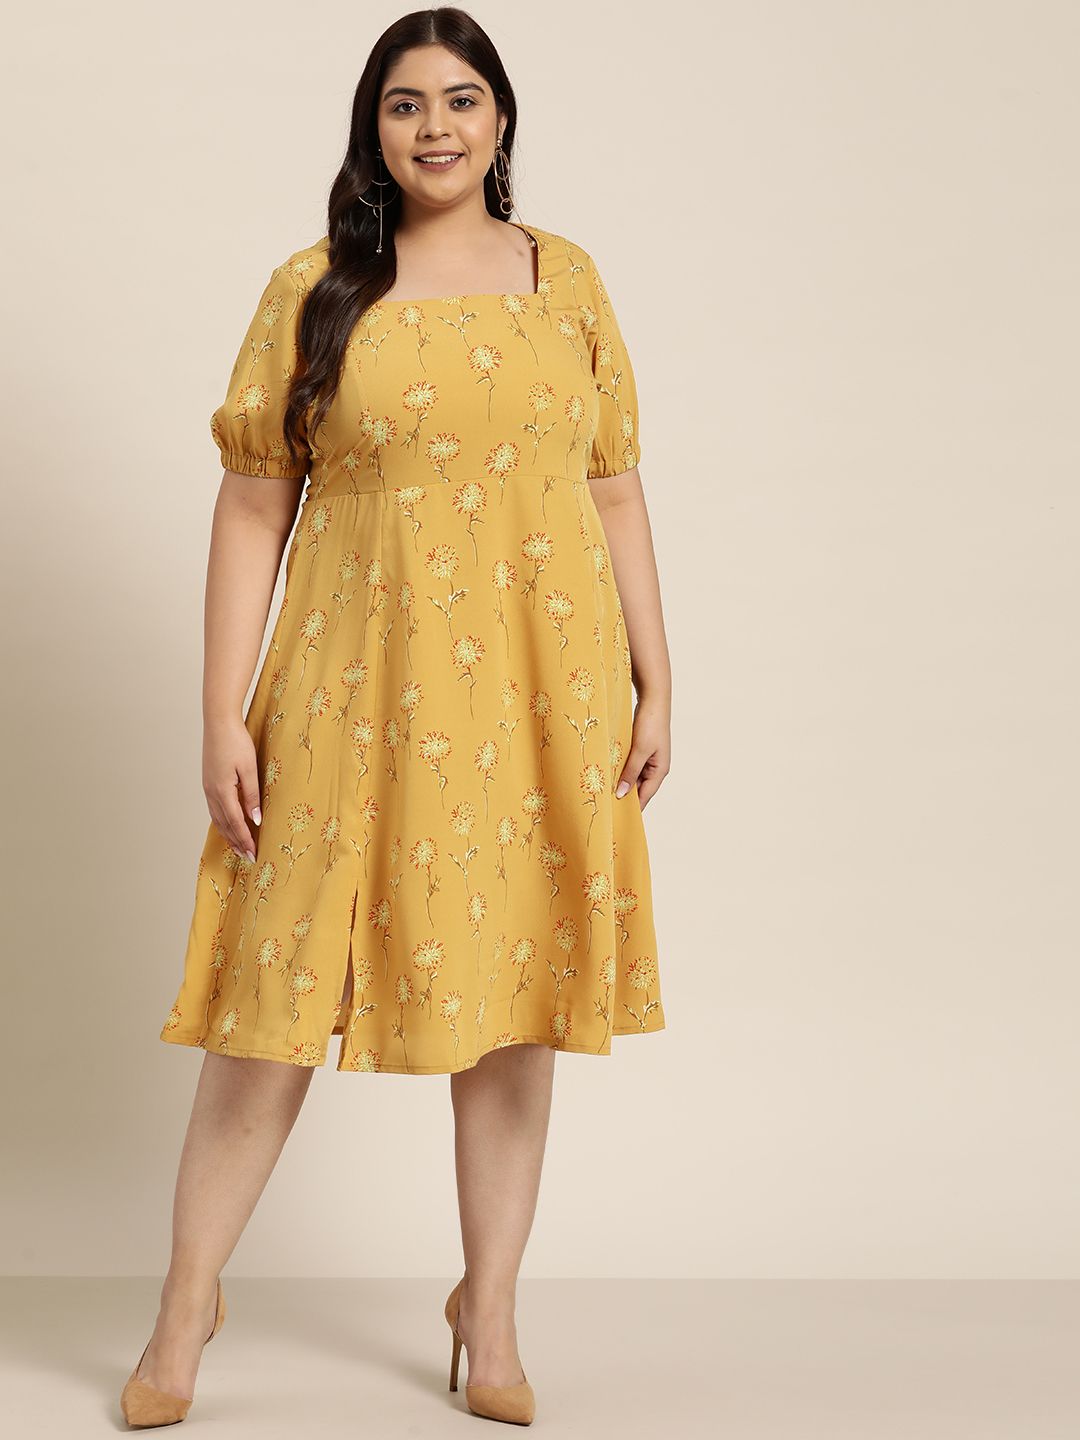 Sztori Plus Size Mustard Yellow & Red Floral Printed A-Line Midi Dress Price in India